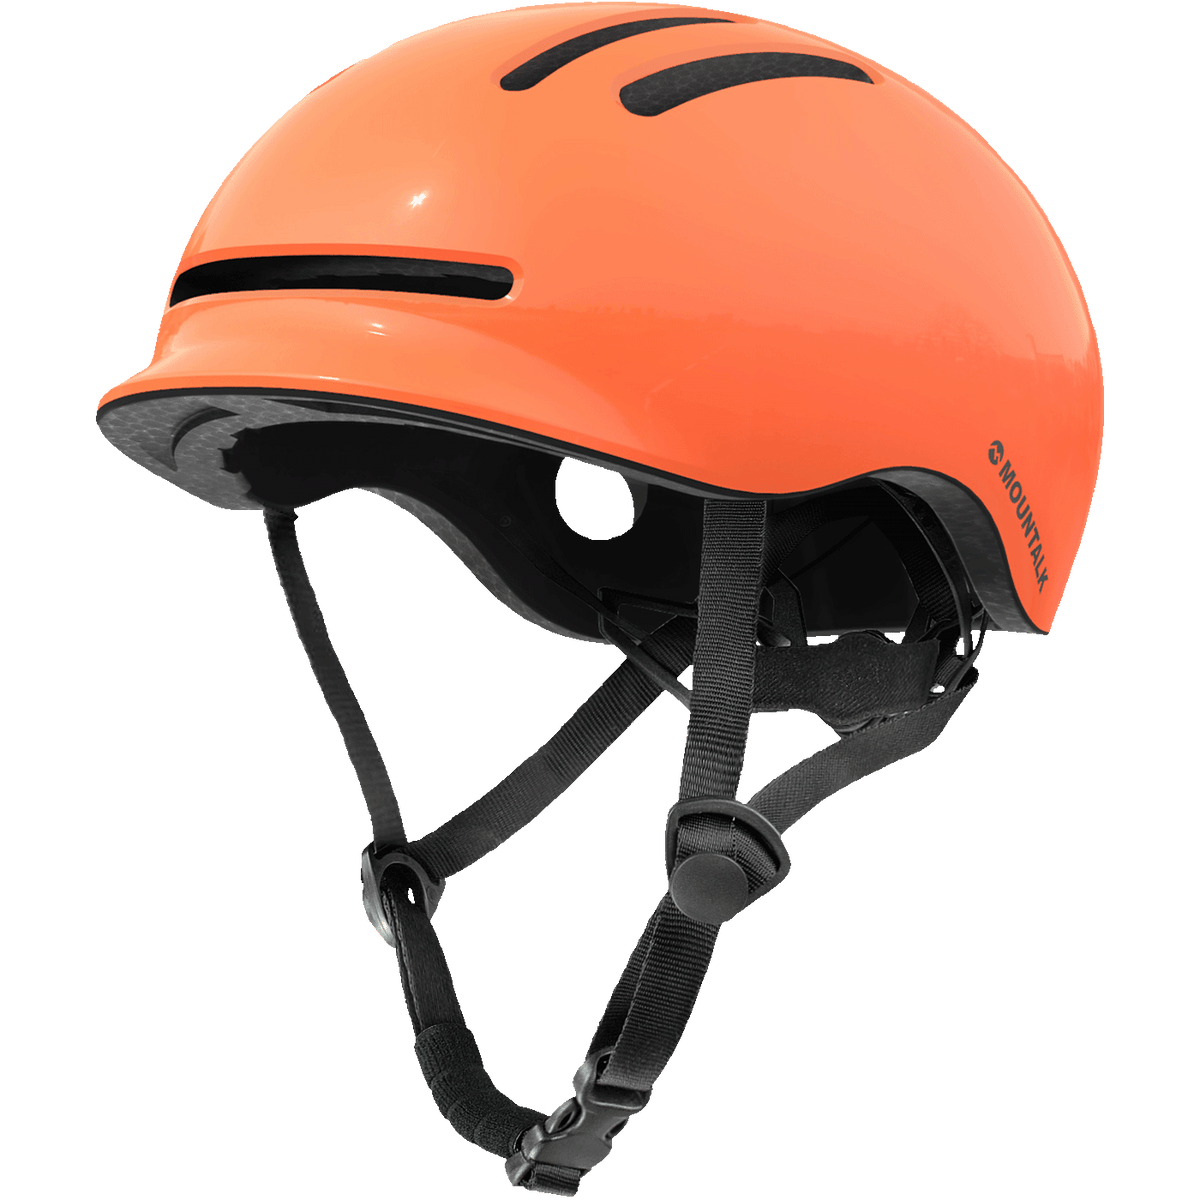 Bike Helmets for Adults with Magnetic Light, Shiny Orange